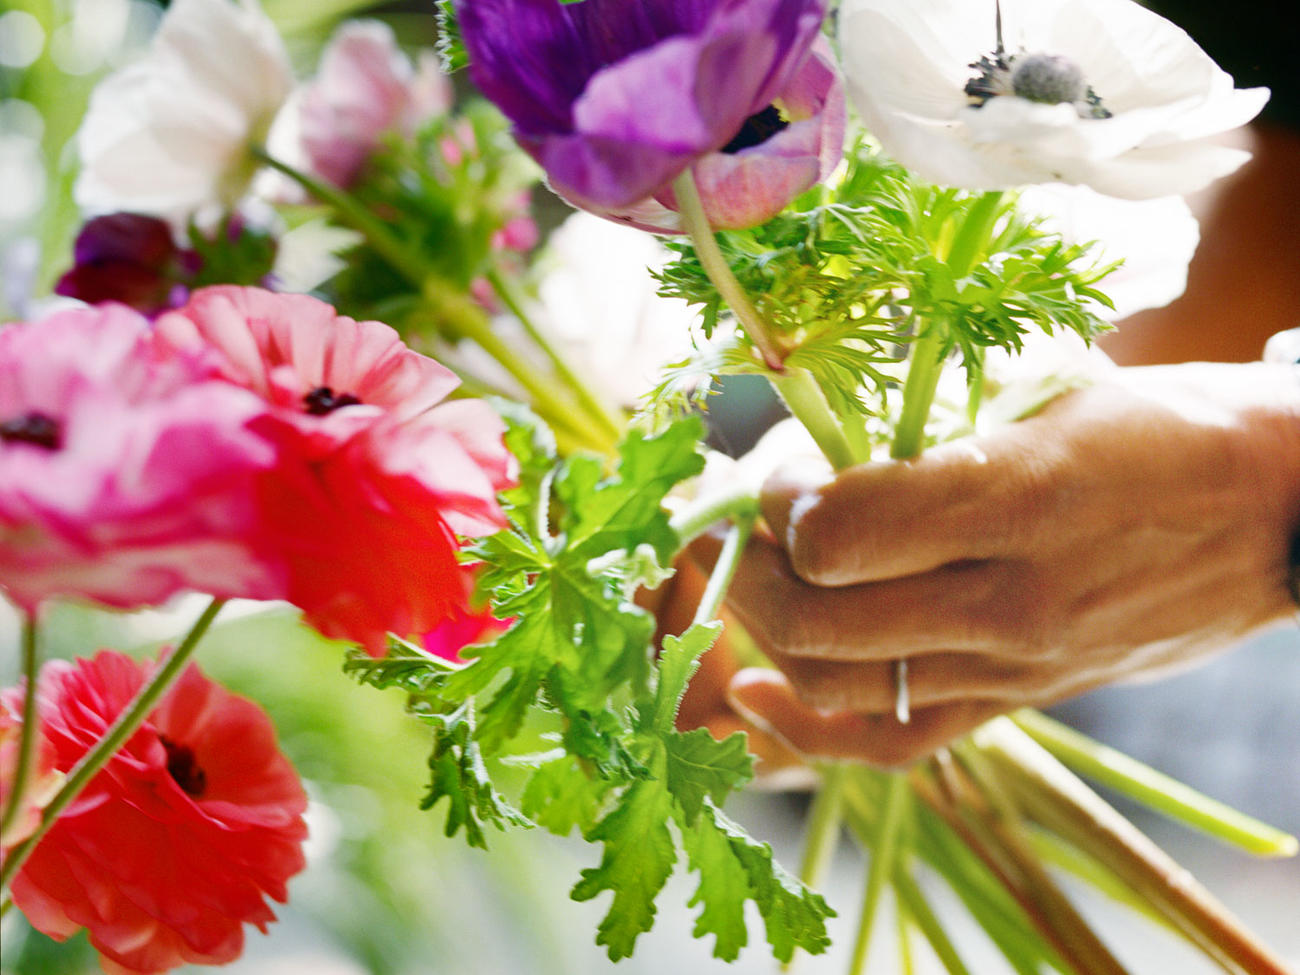 How to Grow Flowers Organically